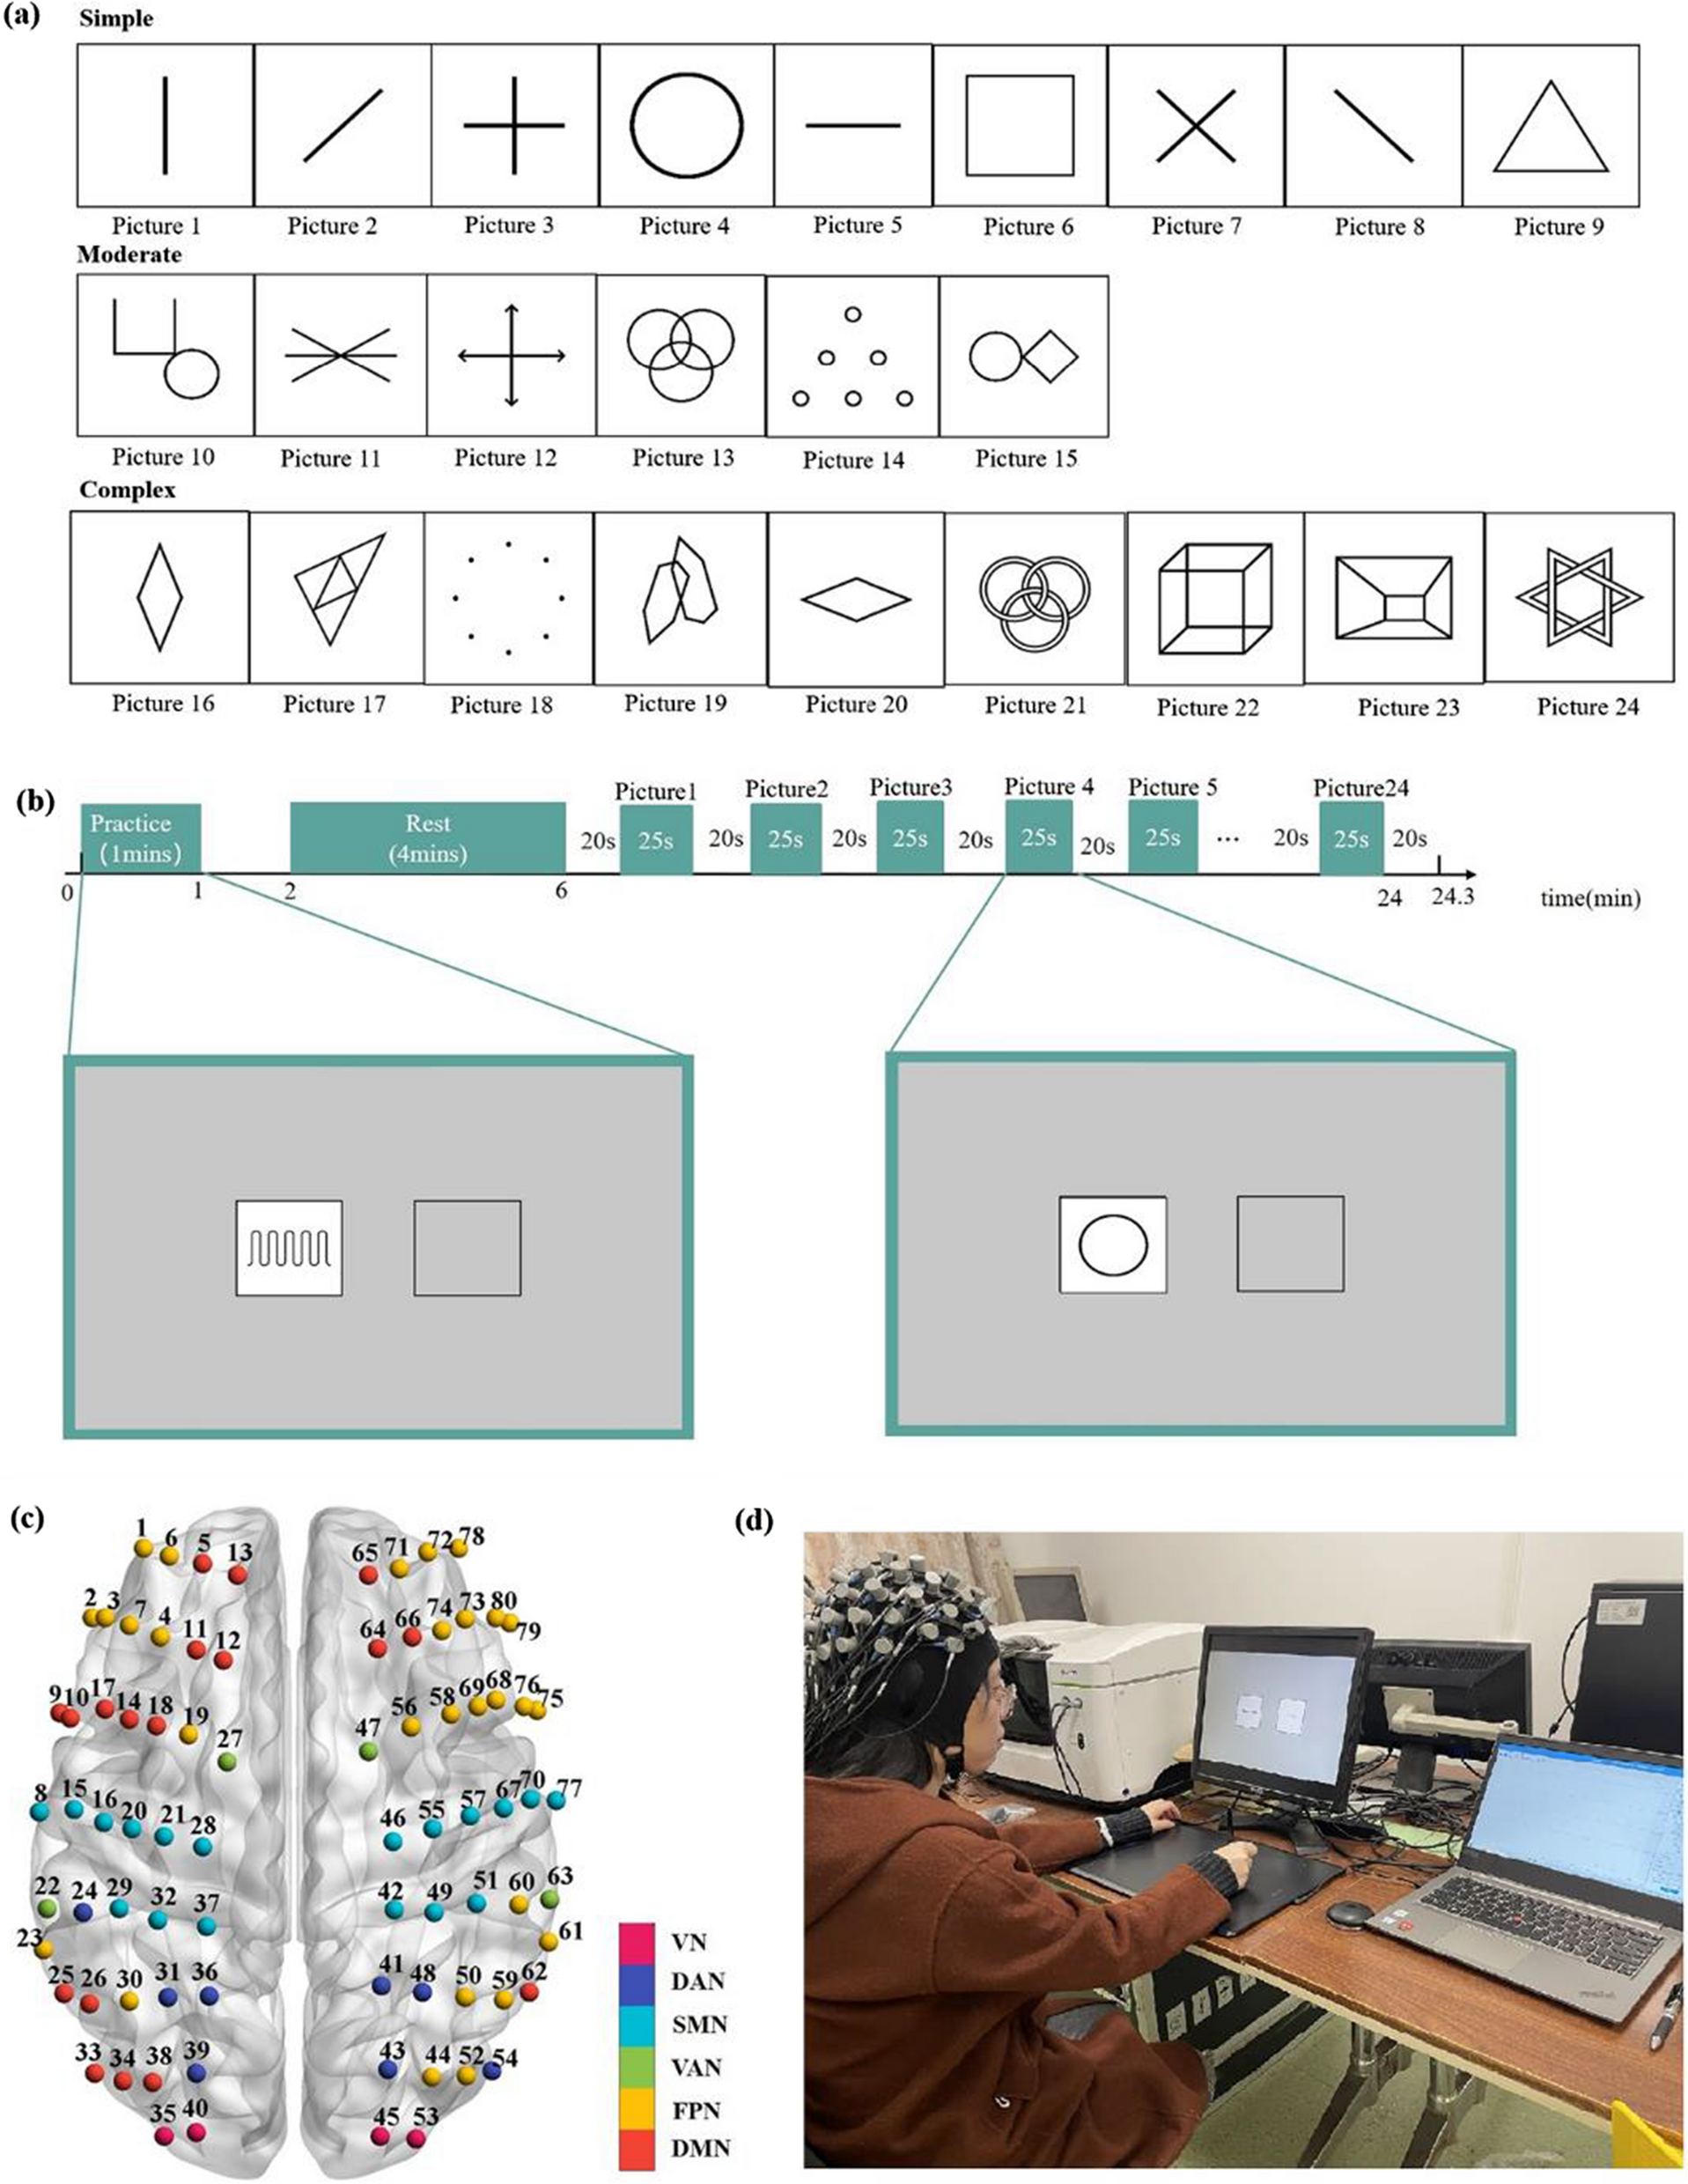 Changes in effective connectivity during the visual-motor integration tasks: a preliminary f-NIRS study